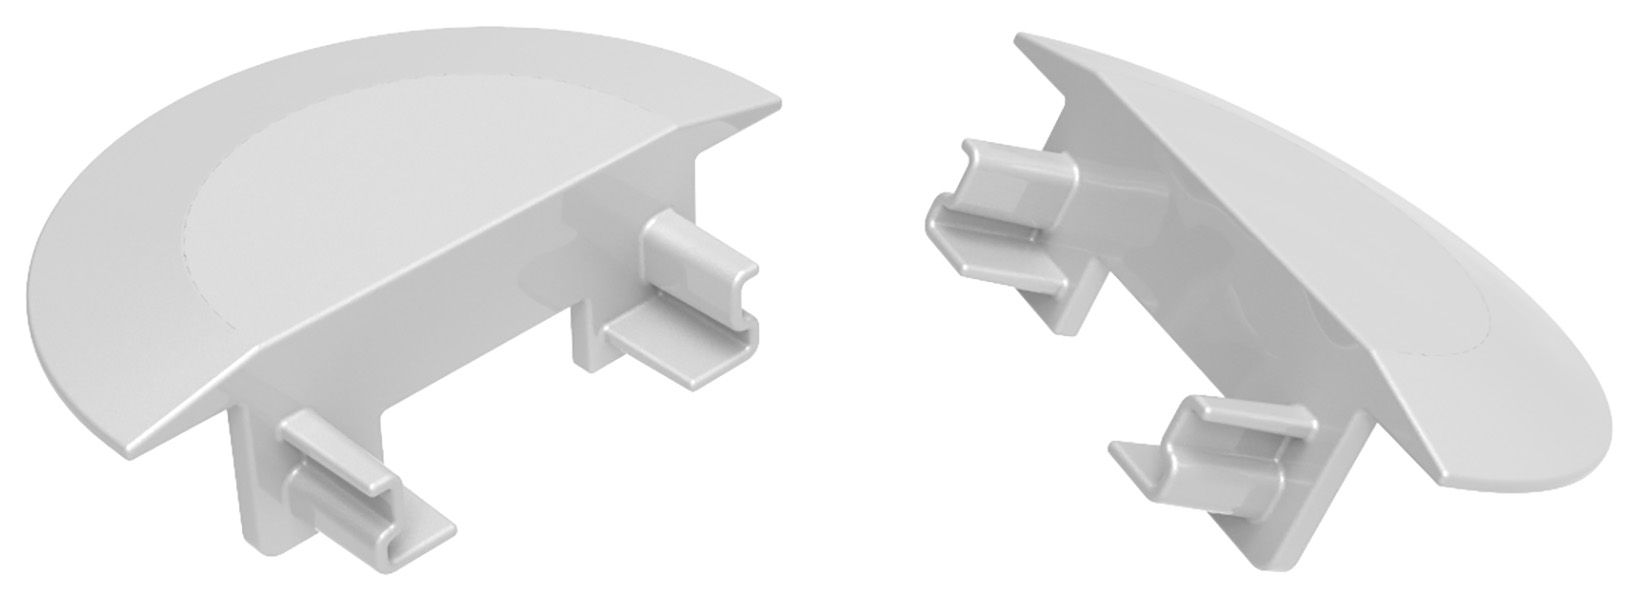 Image of Sensio Silver End Caps for Mackay Profiles (2 end caps)